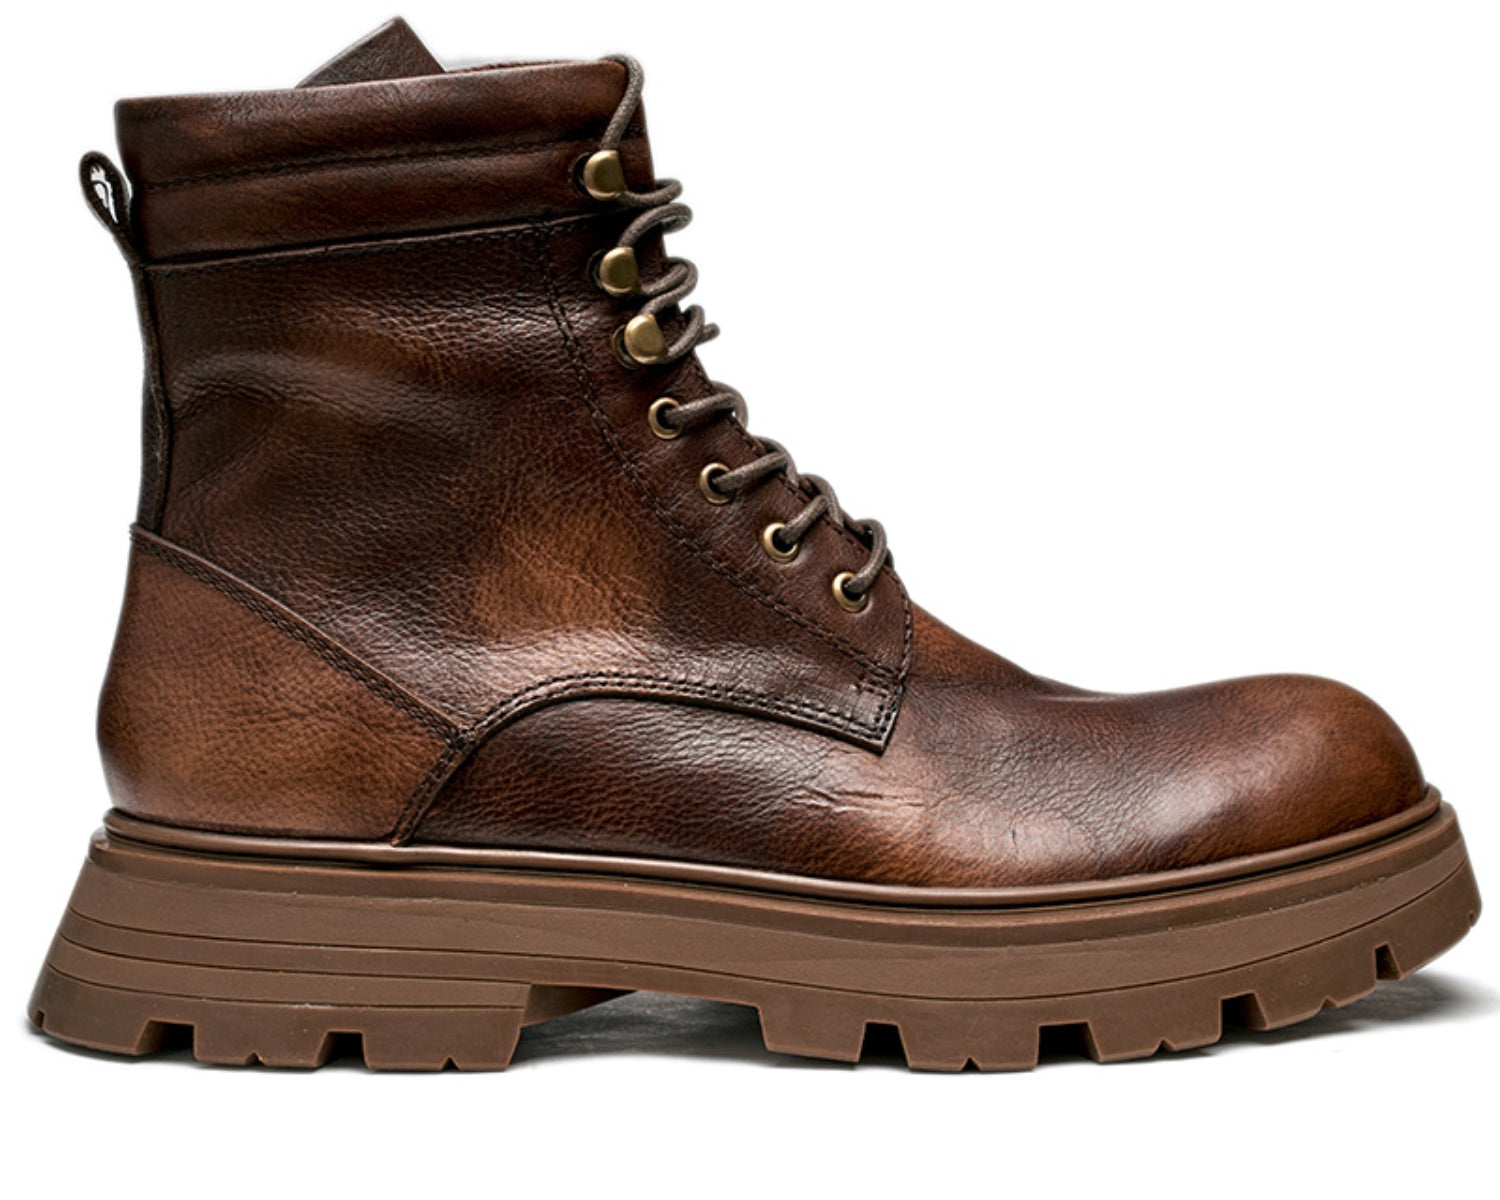 Men's weatherproof leather lace-up work boots with lug sole0